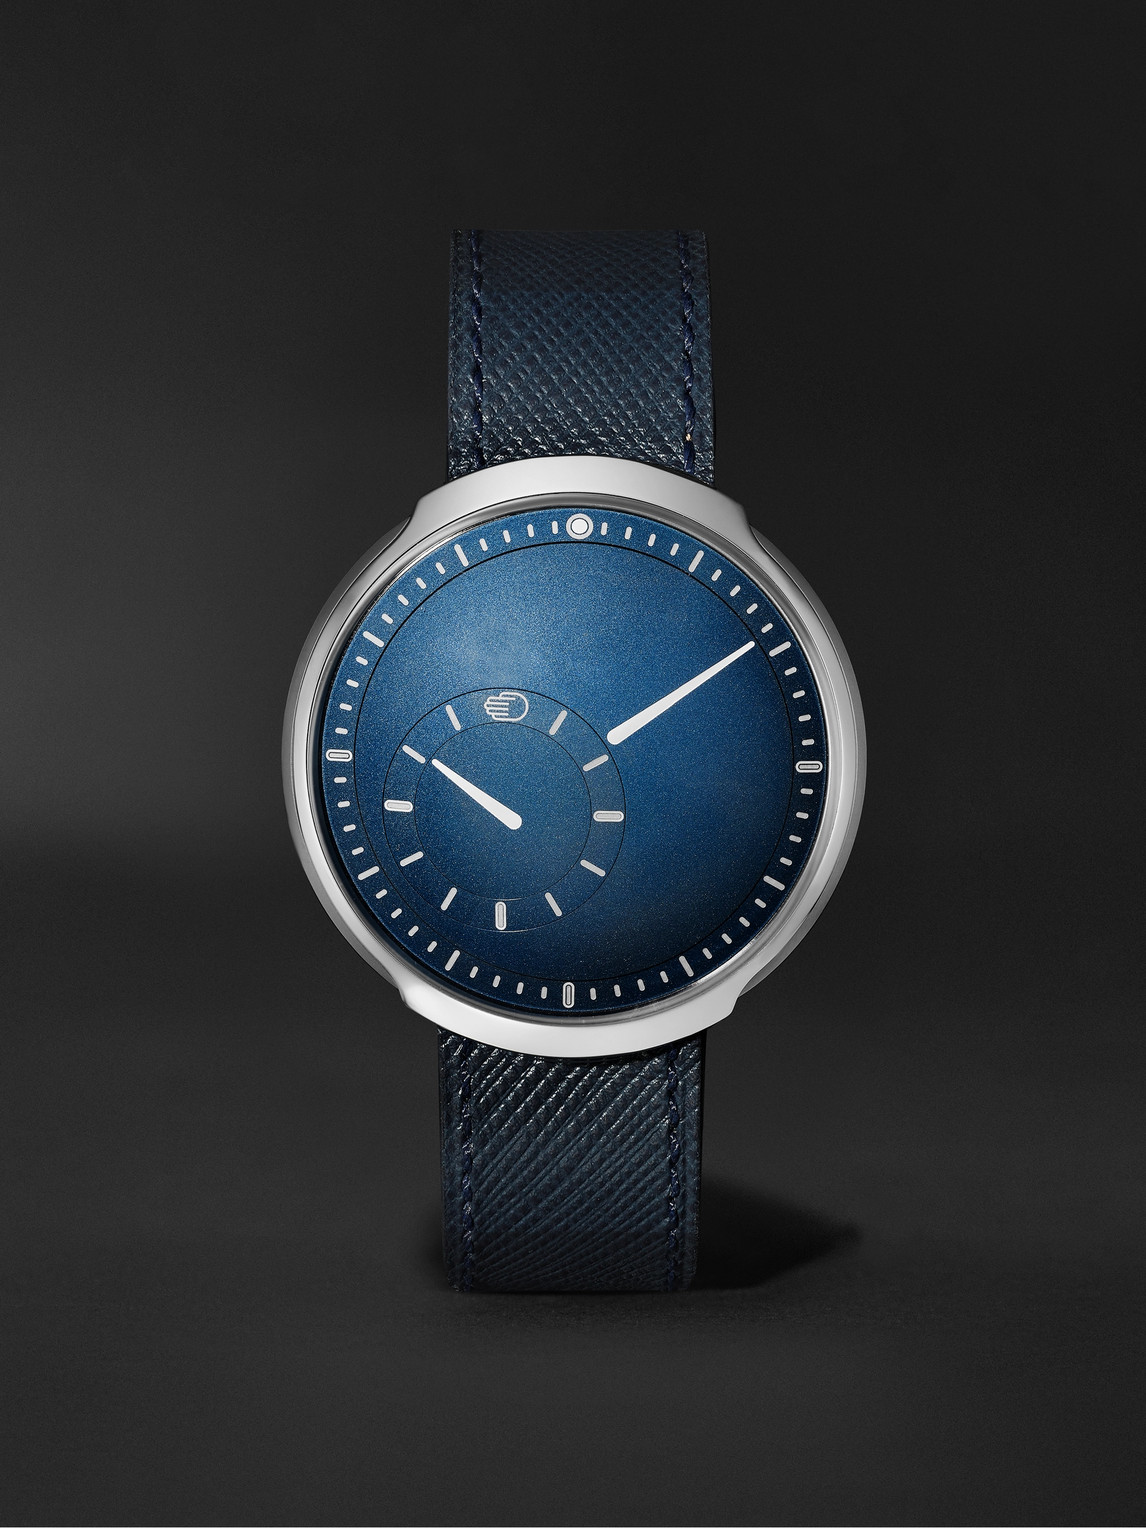 Ressence Type 8 Mechanical 42.9mm Titanium And Leather Watch, Ref. No. Type 8c In Blue